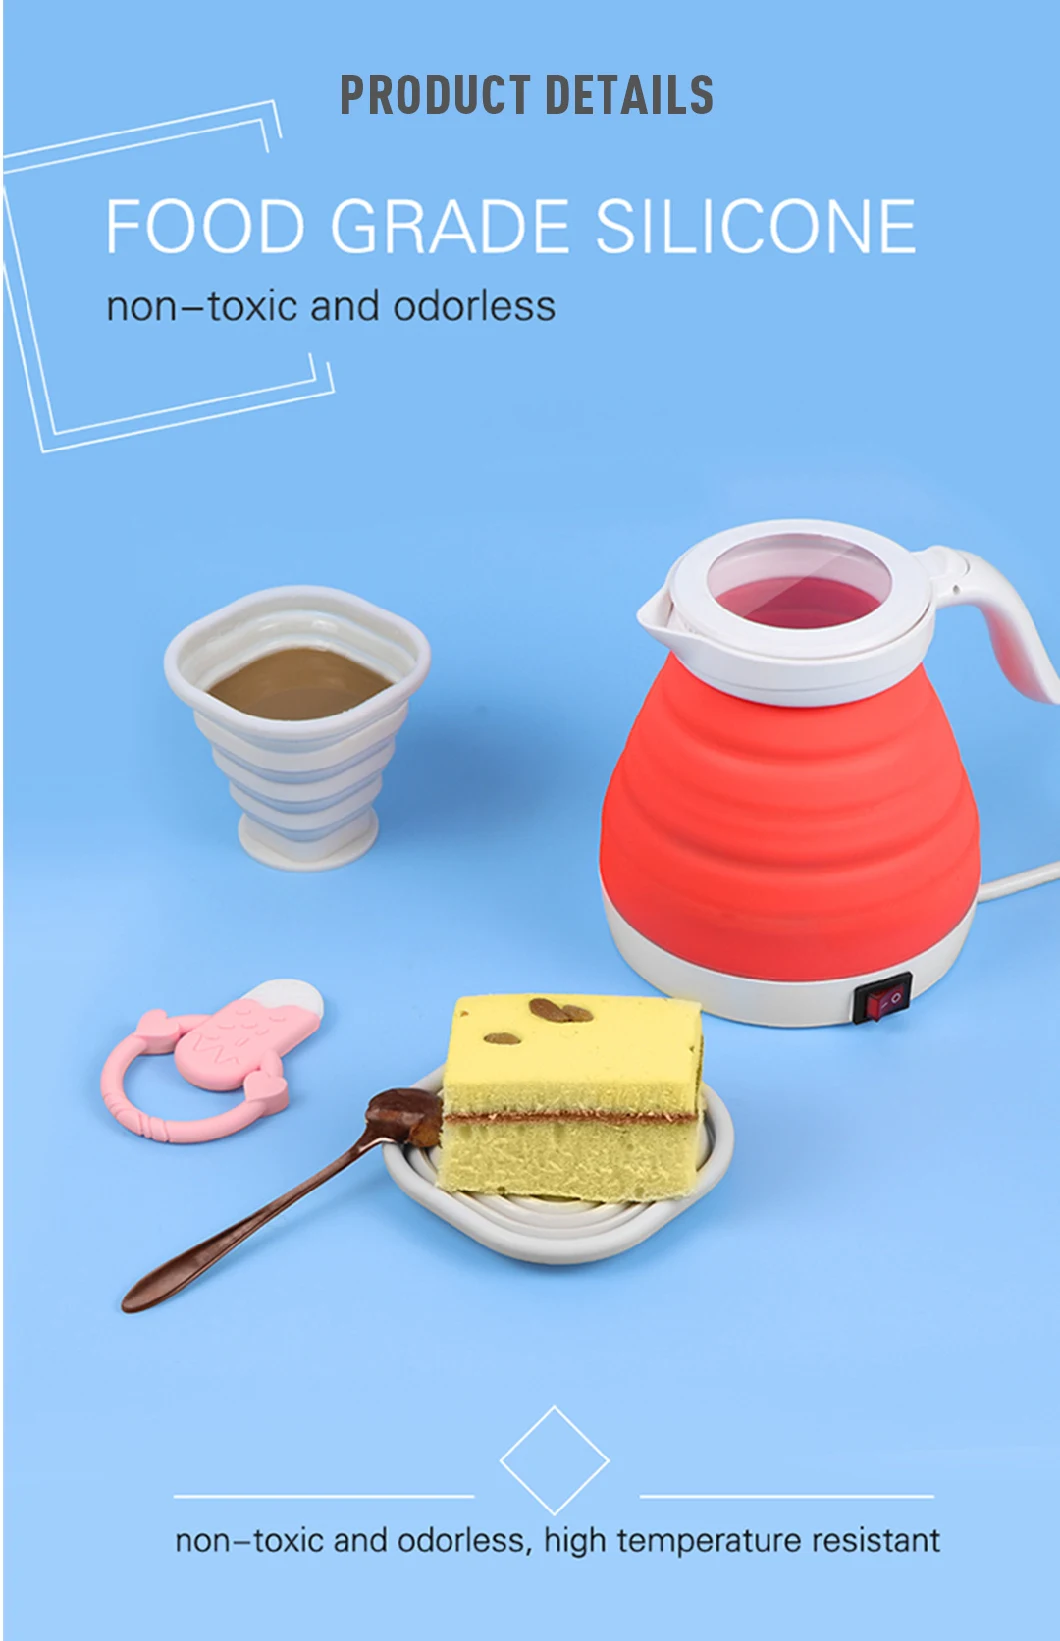 High Quality Electric Silicone Folding Stainless Steel Fast Boiling Teapot Kettle